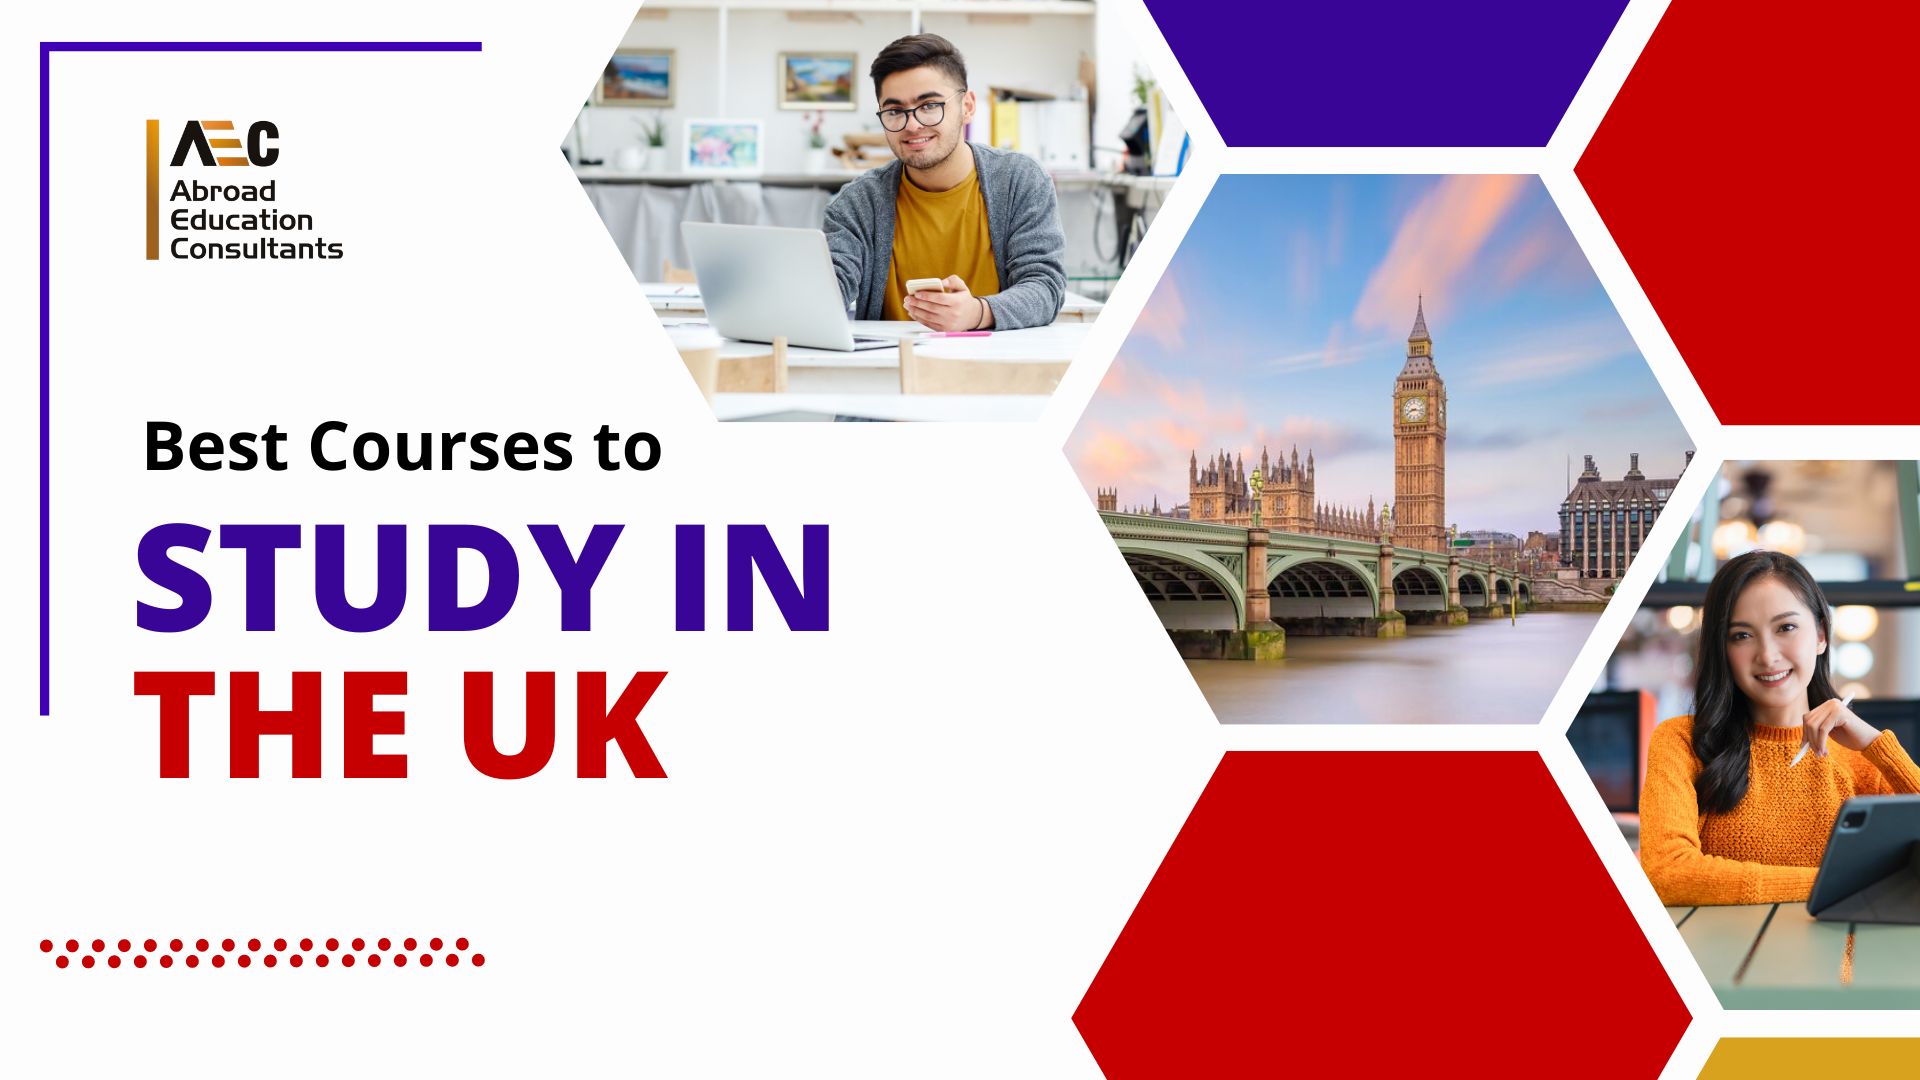 Best Courses to Study in the UK